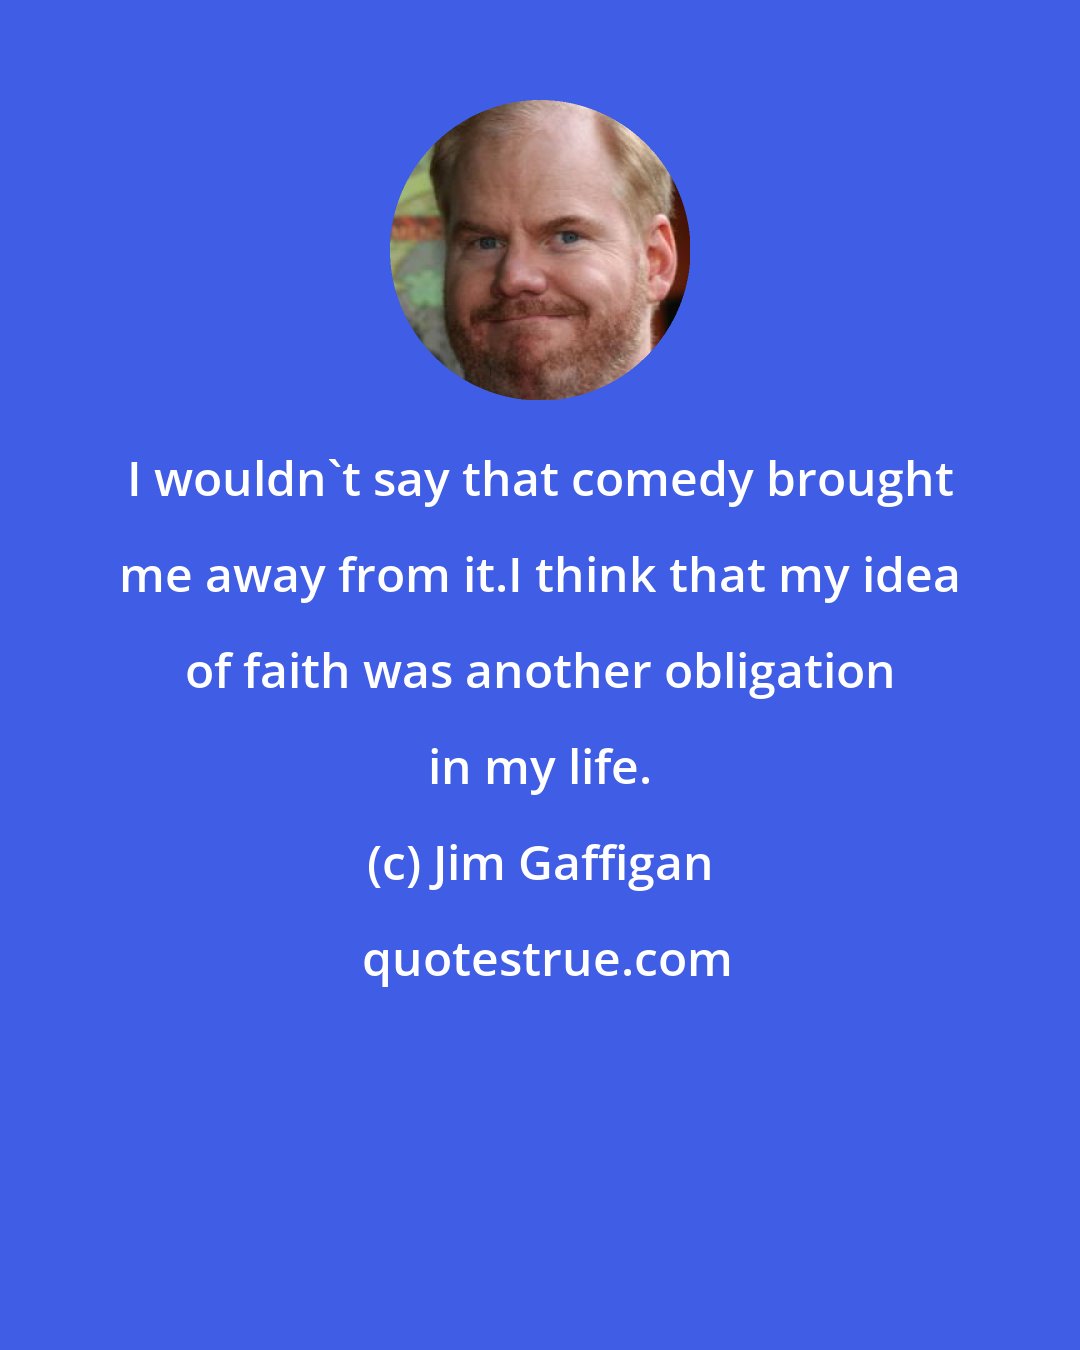 Jim Gaffigan: I wouldn't say that comedy brought me away from it.I think that my idea of faith was another obligation in my life.